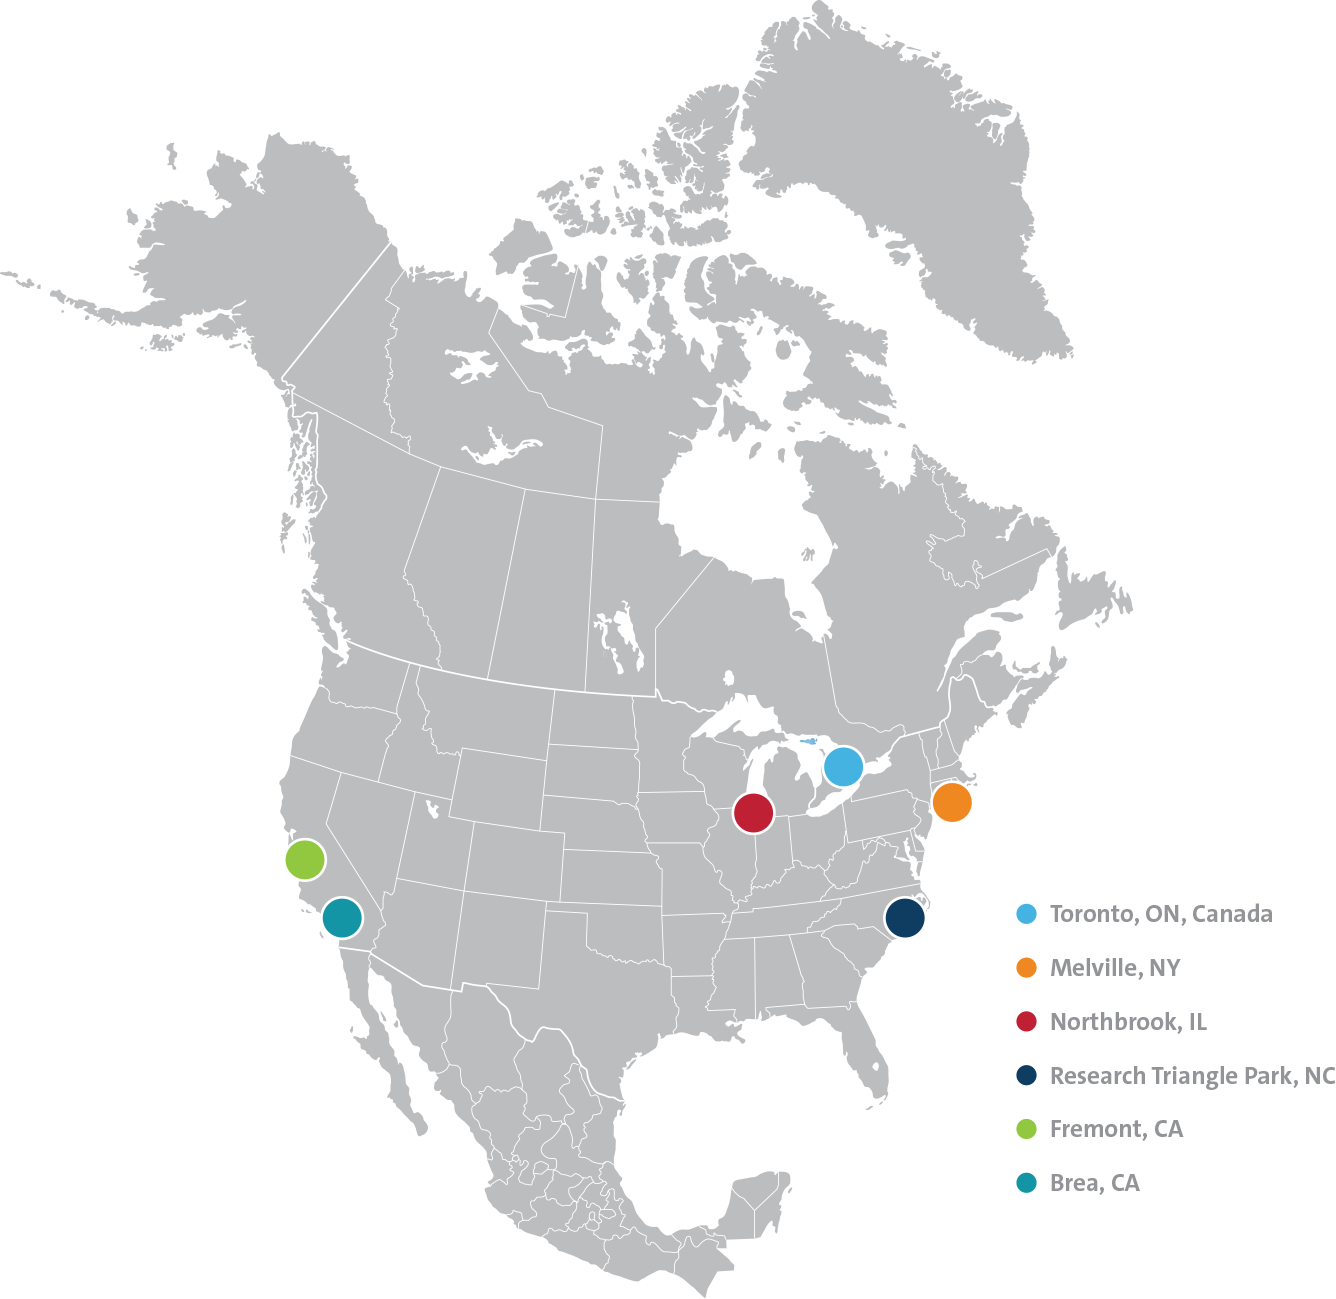 UL-2021-assessed locations map